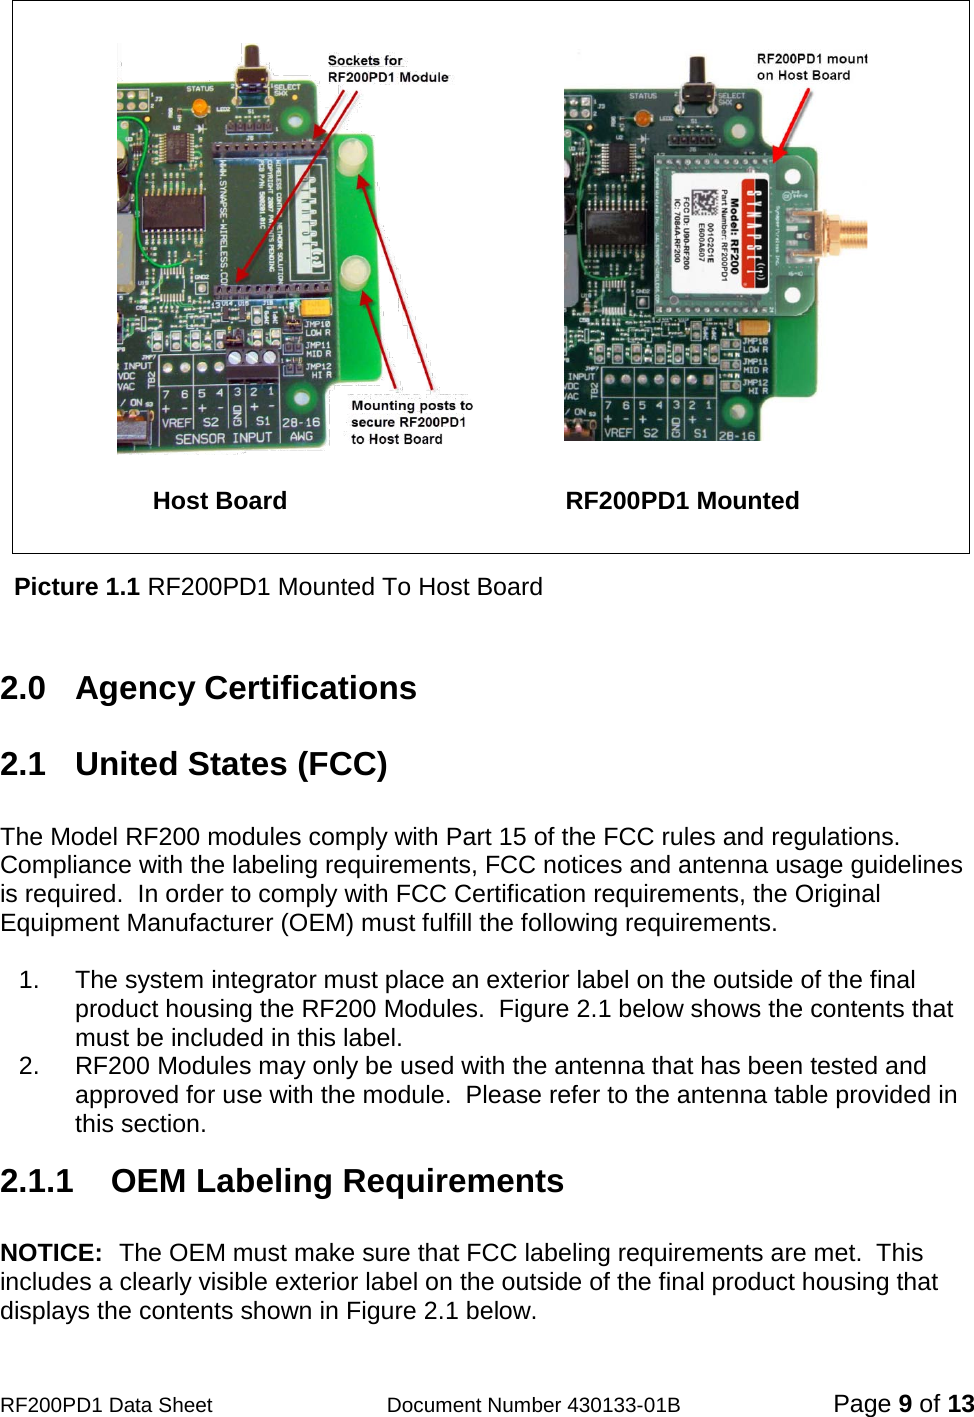                                            RF200PD1 Data Sheet                  Document Number 430133-01B  Page 9 of 13                                                                        Host Board                                        RF200PD1 Mounted      Picture 1.1 RF200PD1 Mounted To Host Board   2.0  Agency Certifications  2.1  United States (FCC)  The Model RF200 modules comply with Part 15 of the FCC rules and regulations.  Compliance with the labeling requirements, FCC notices and antenna usage guidelines is required.  In order to comply with FCC Certification requirements, the Original Equipment Manufacturer (OEM) must fulfill the following requirements.  1. The system integrator must place an exterior label on the outside of the final product housing the RF200 Modules.  Figure 2.1 below shows the contents that must be included in this label. 2. RF200 Modules may only be used with the antenna that has been tested and approved for use with the module.  Please refer to the antenna table provided in this section.  2.1.1    OEM Labeling Requirements  NOTICE:  The OEM must make sure that FCC labeling requirements are met.  This includes a clearly visible exterior label on the outside of the final product housing that displays the contents shown in Figure 2.1 below. 